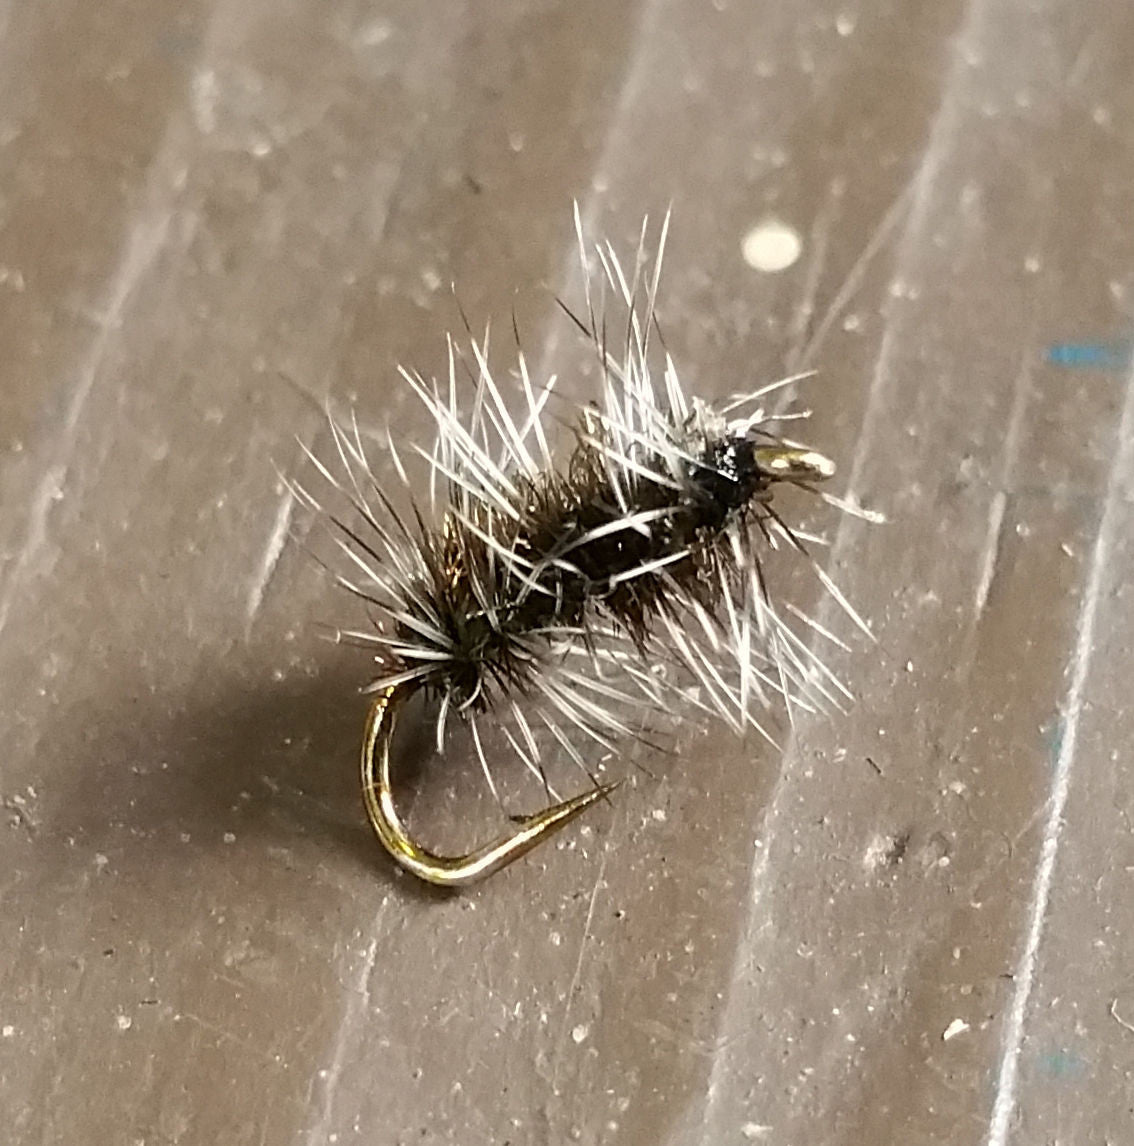 Griffiths Gnat Dry Fly